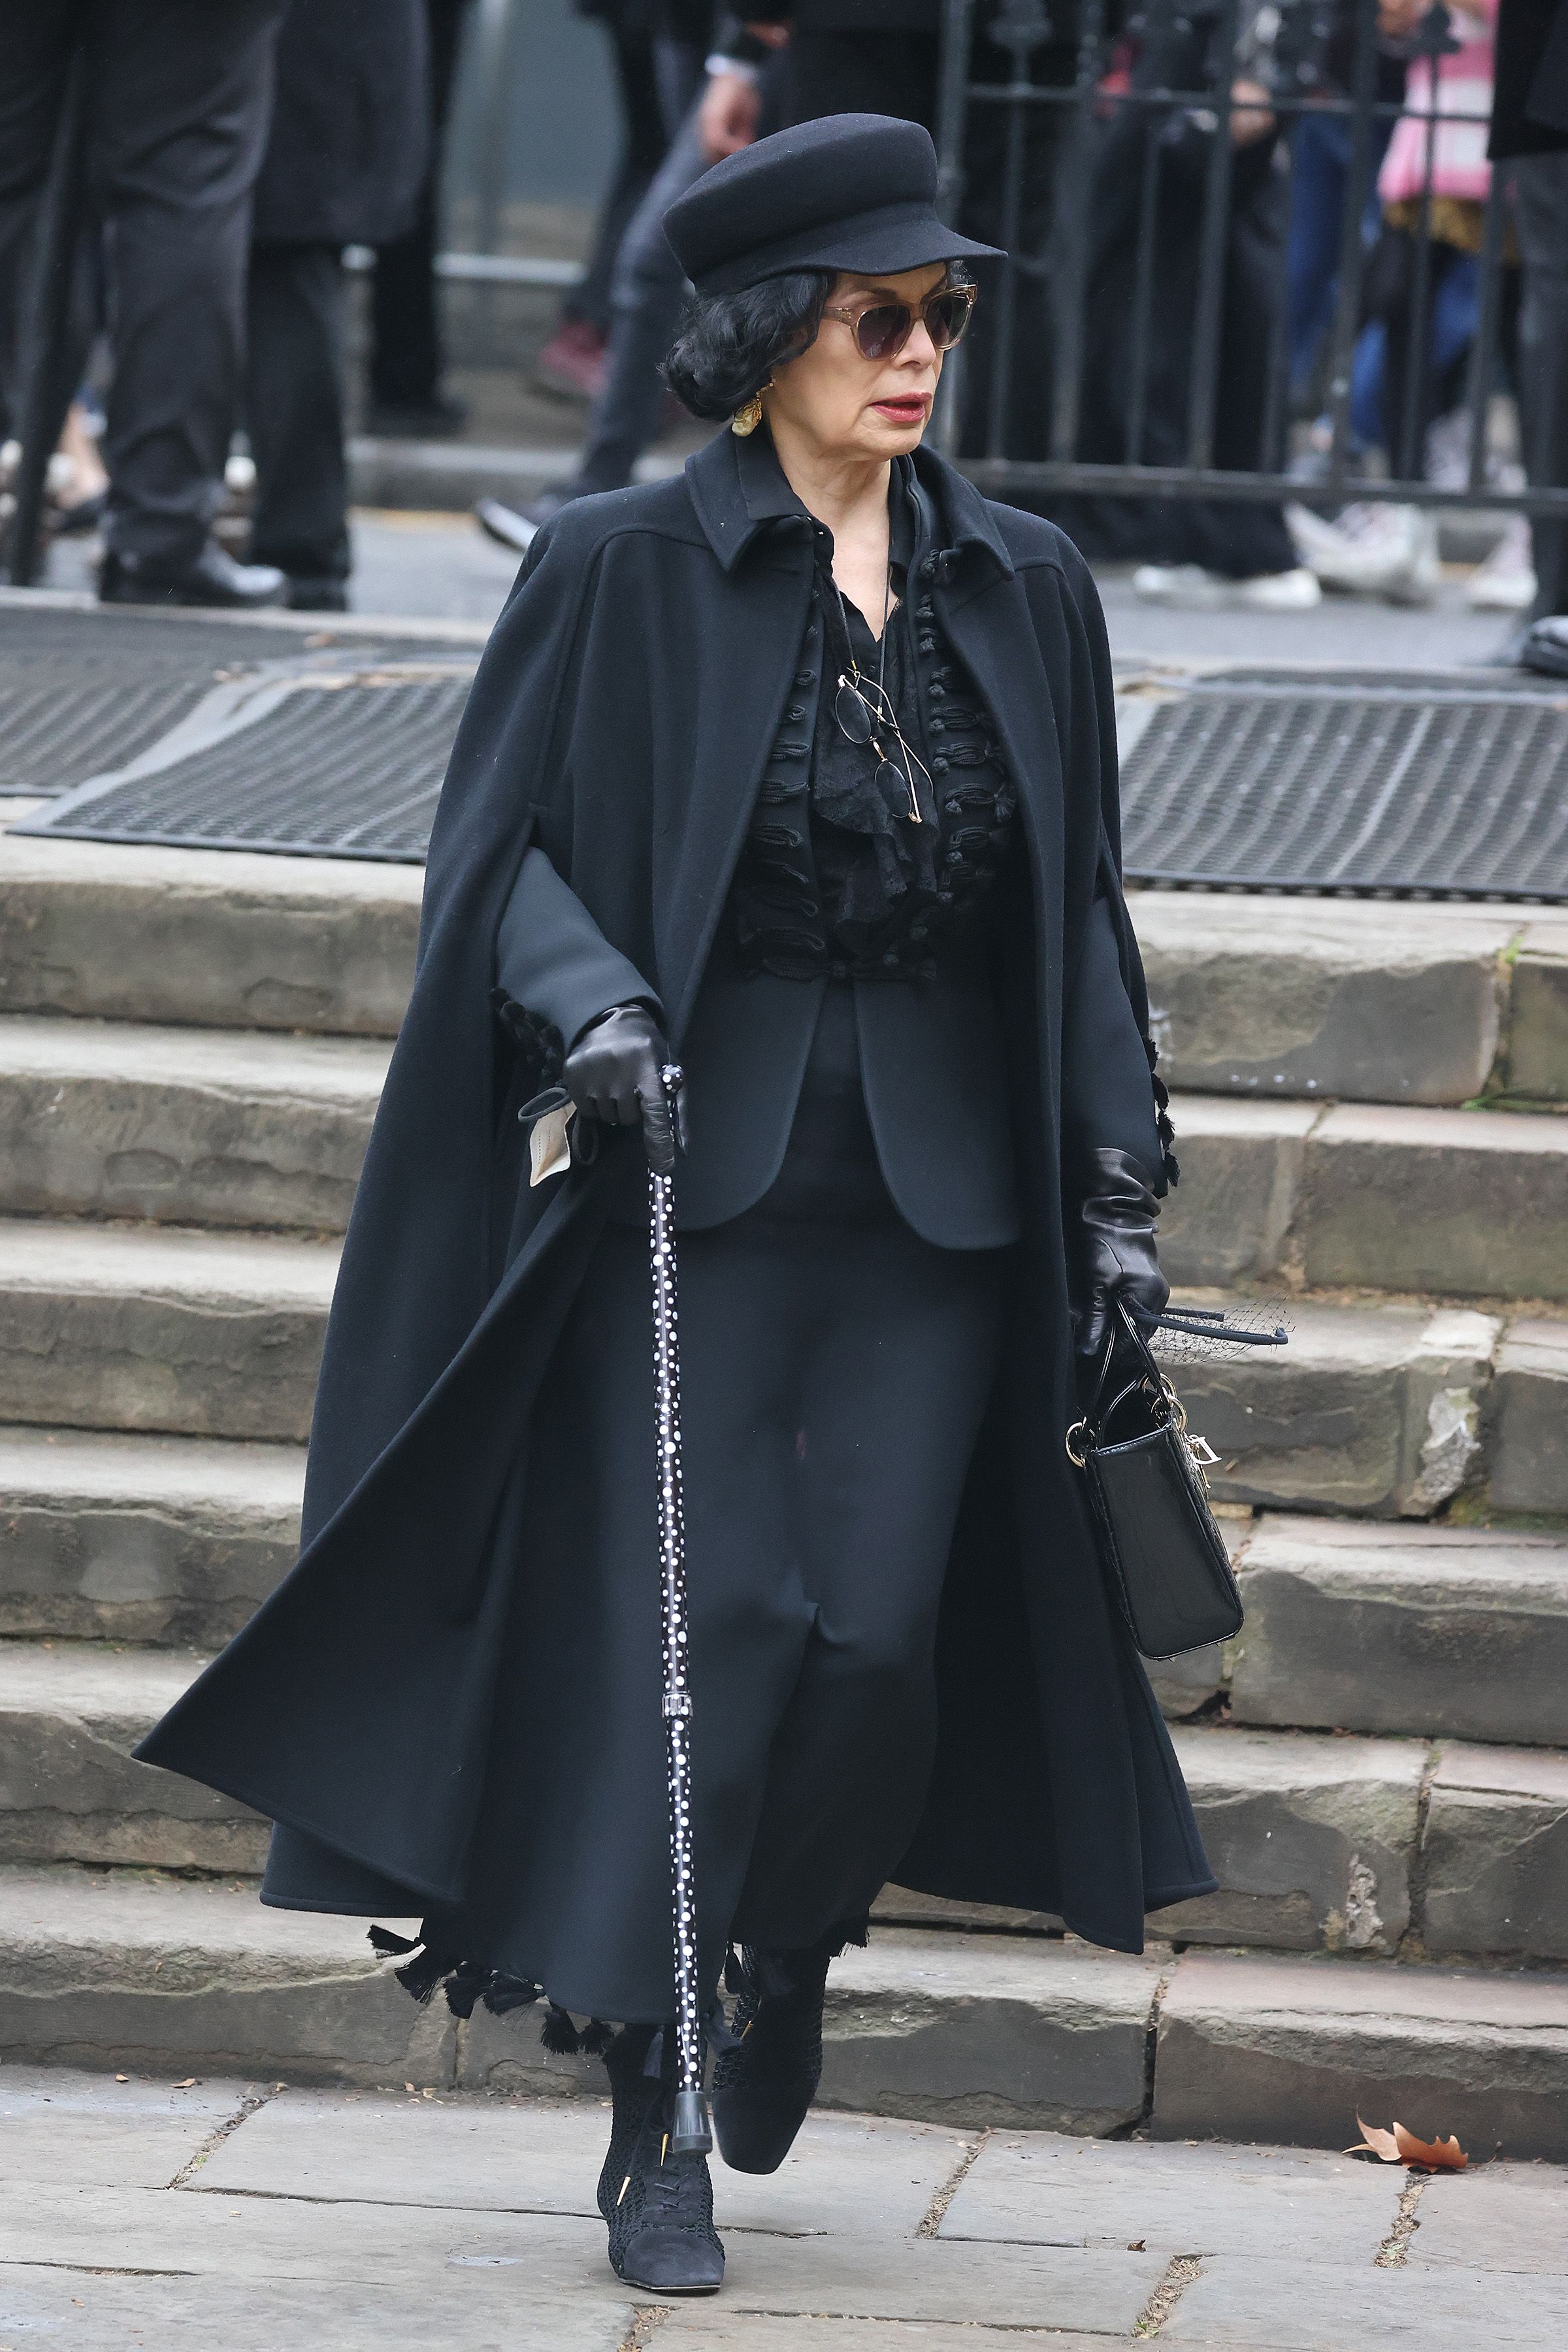 Dame Vivienne Westwood funeral: The best celebrity guest outfits in photos,  from Kate Moss to Helena Bonham Carter